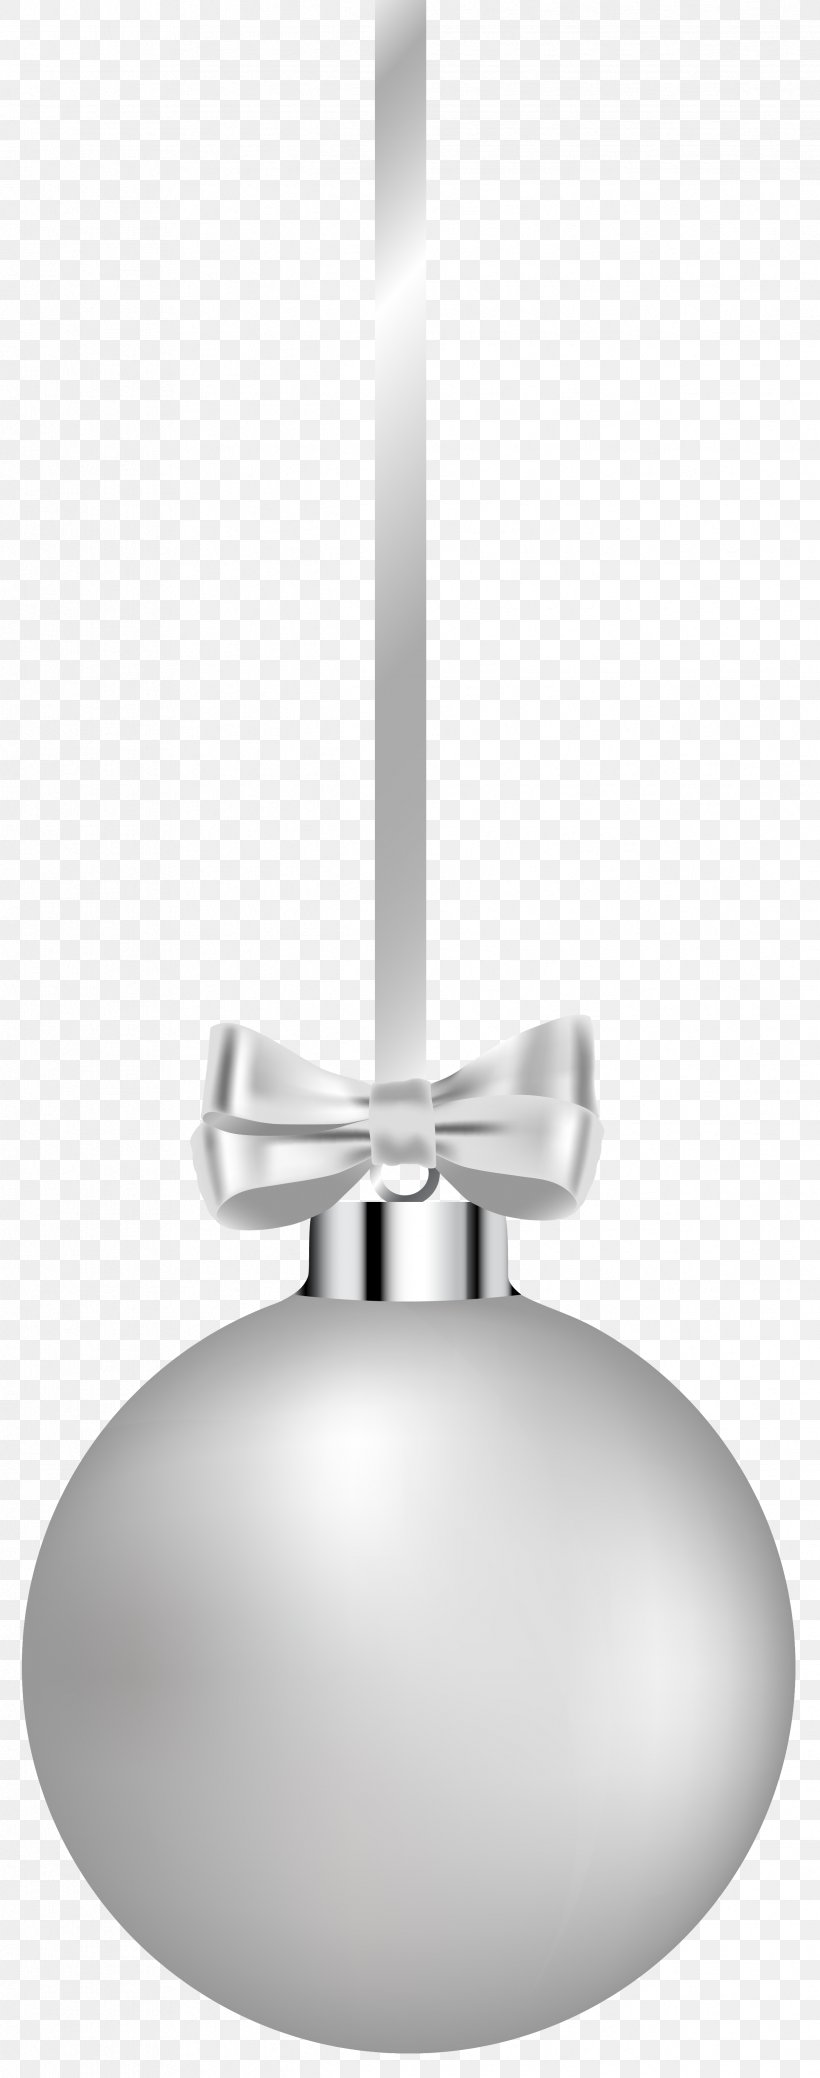 Light Fixture Black And White, PNG, 2438x6179px, Light, Black, Black And White, Light Fixture, Lighting Download Free